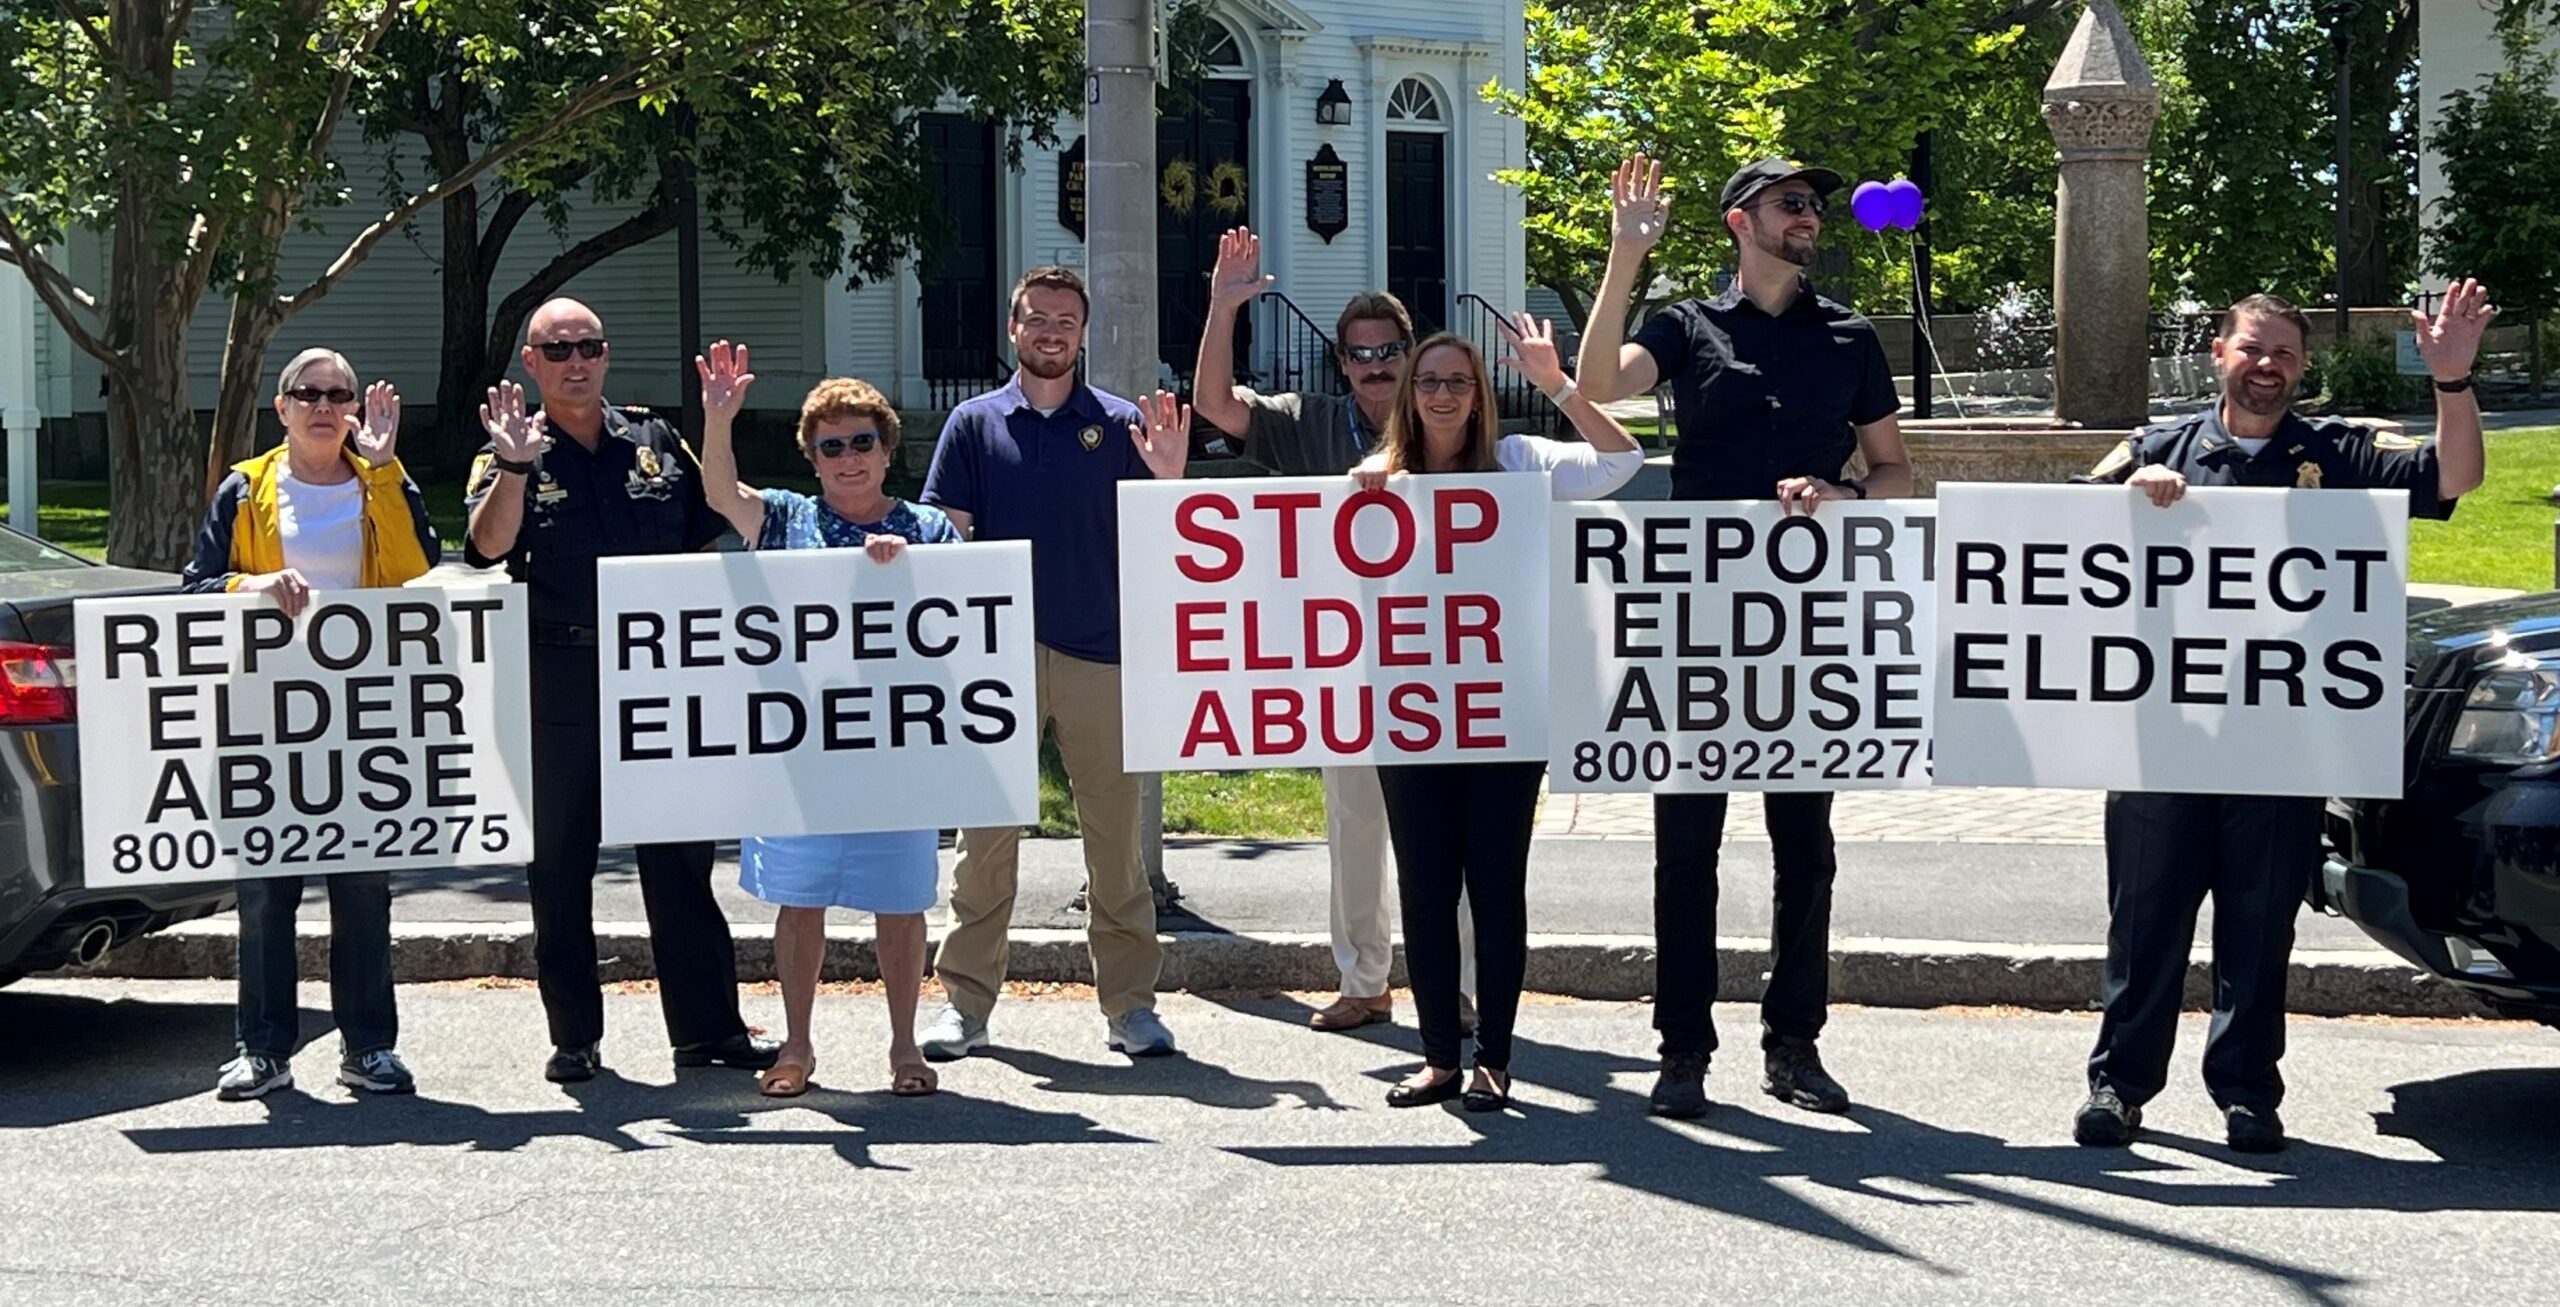 elder abuse awareness rally in Manchester